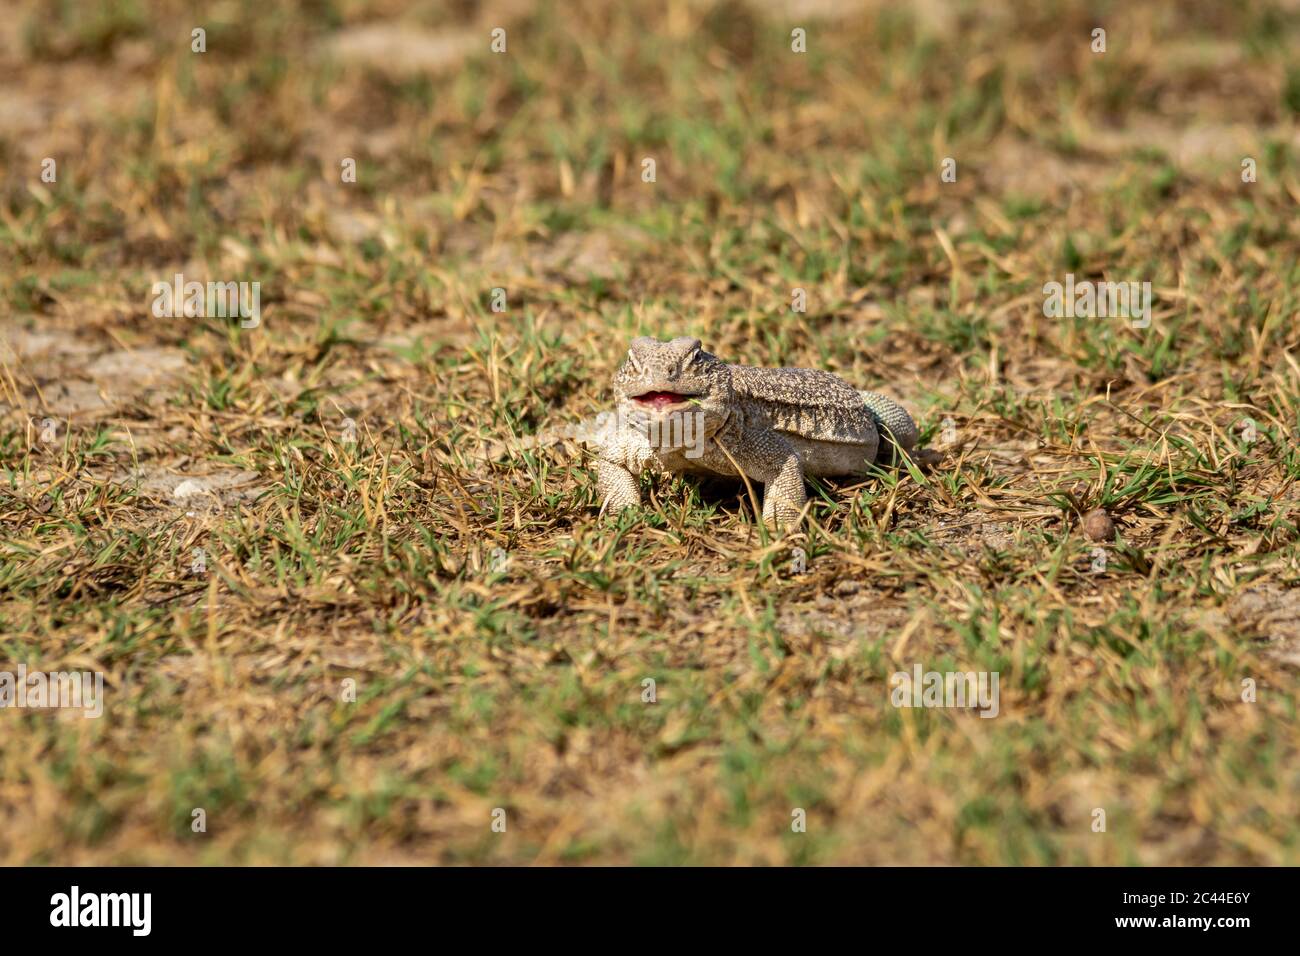 Spiny tailed lizards or Uromastyx in tal chhapar sanctuary rajasthan india Stock Photo